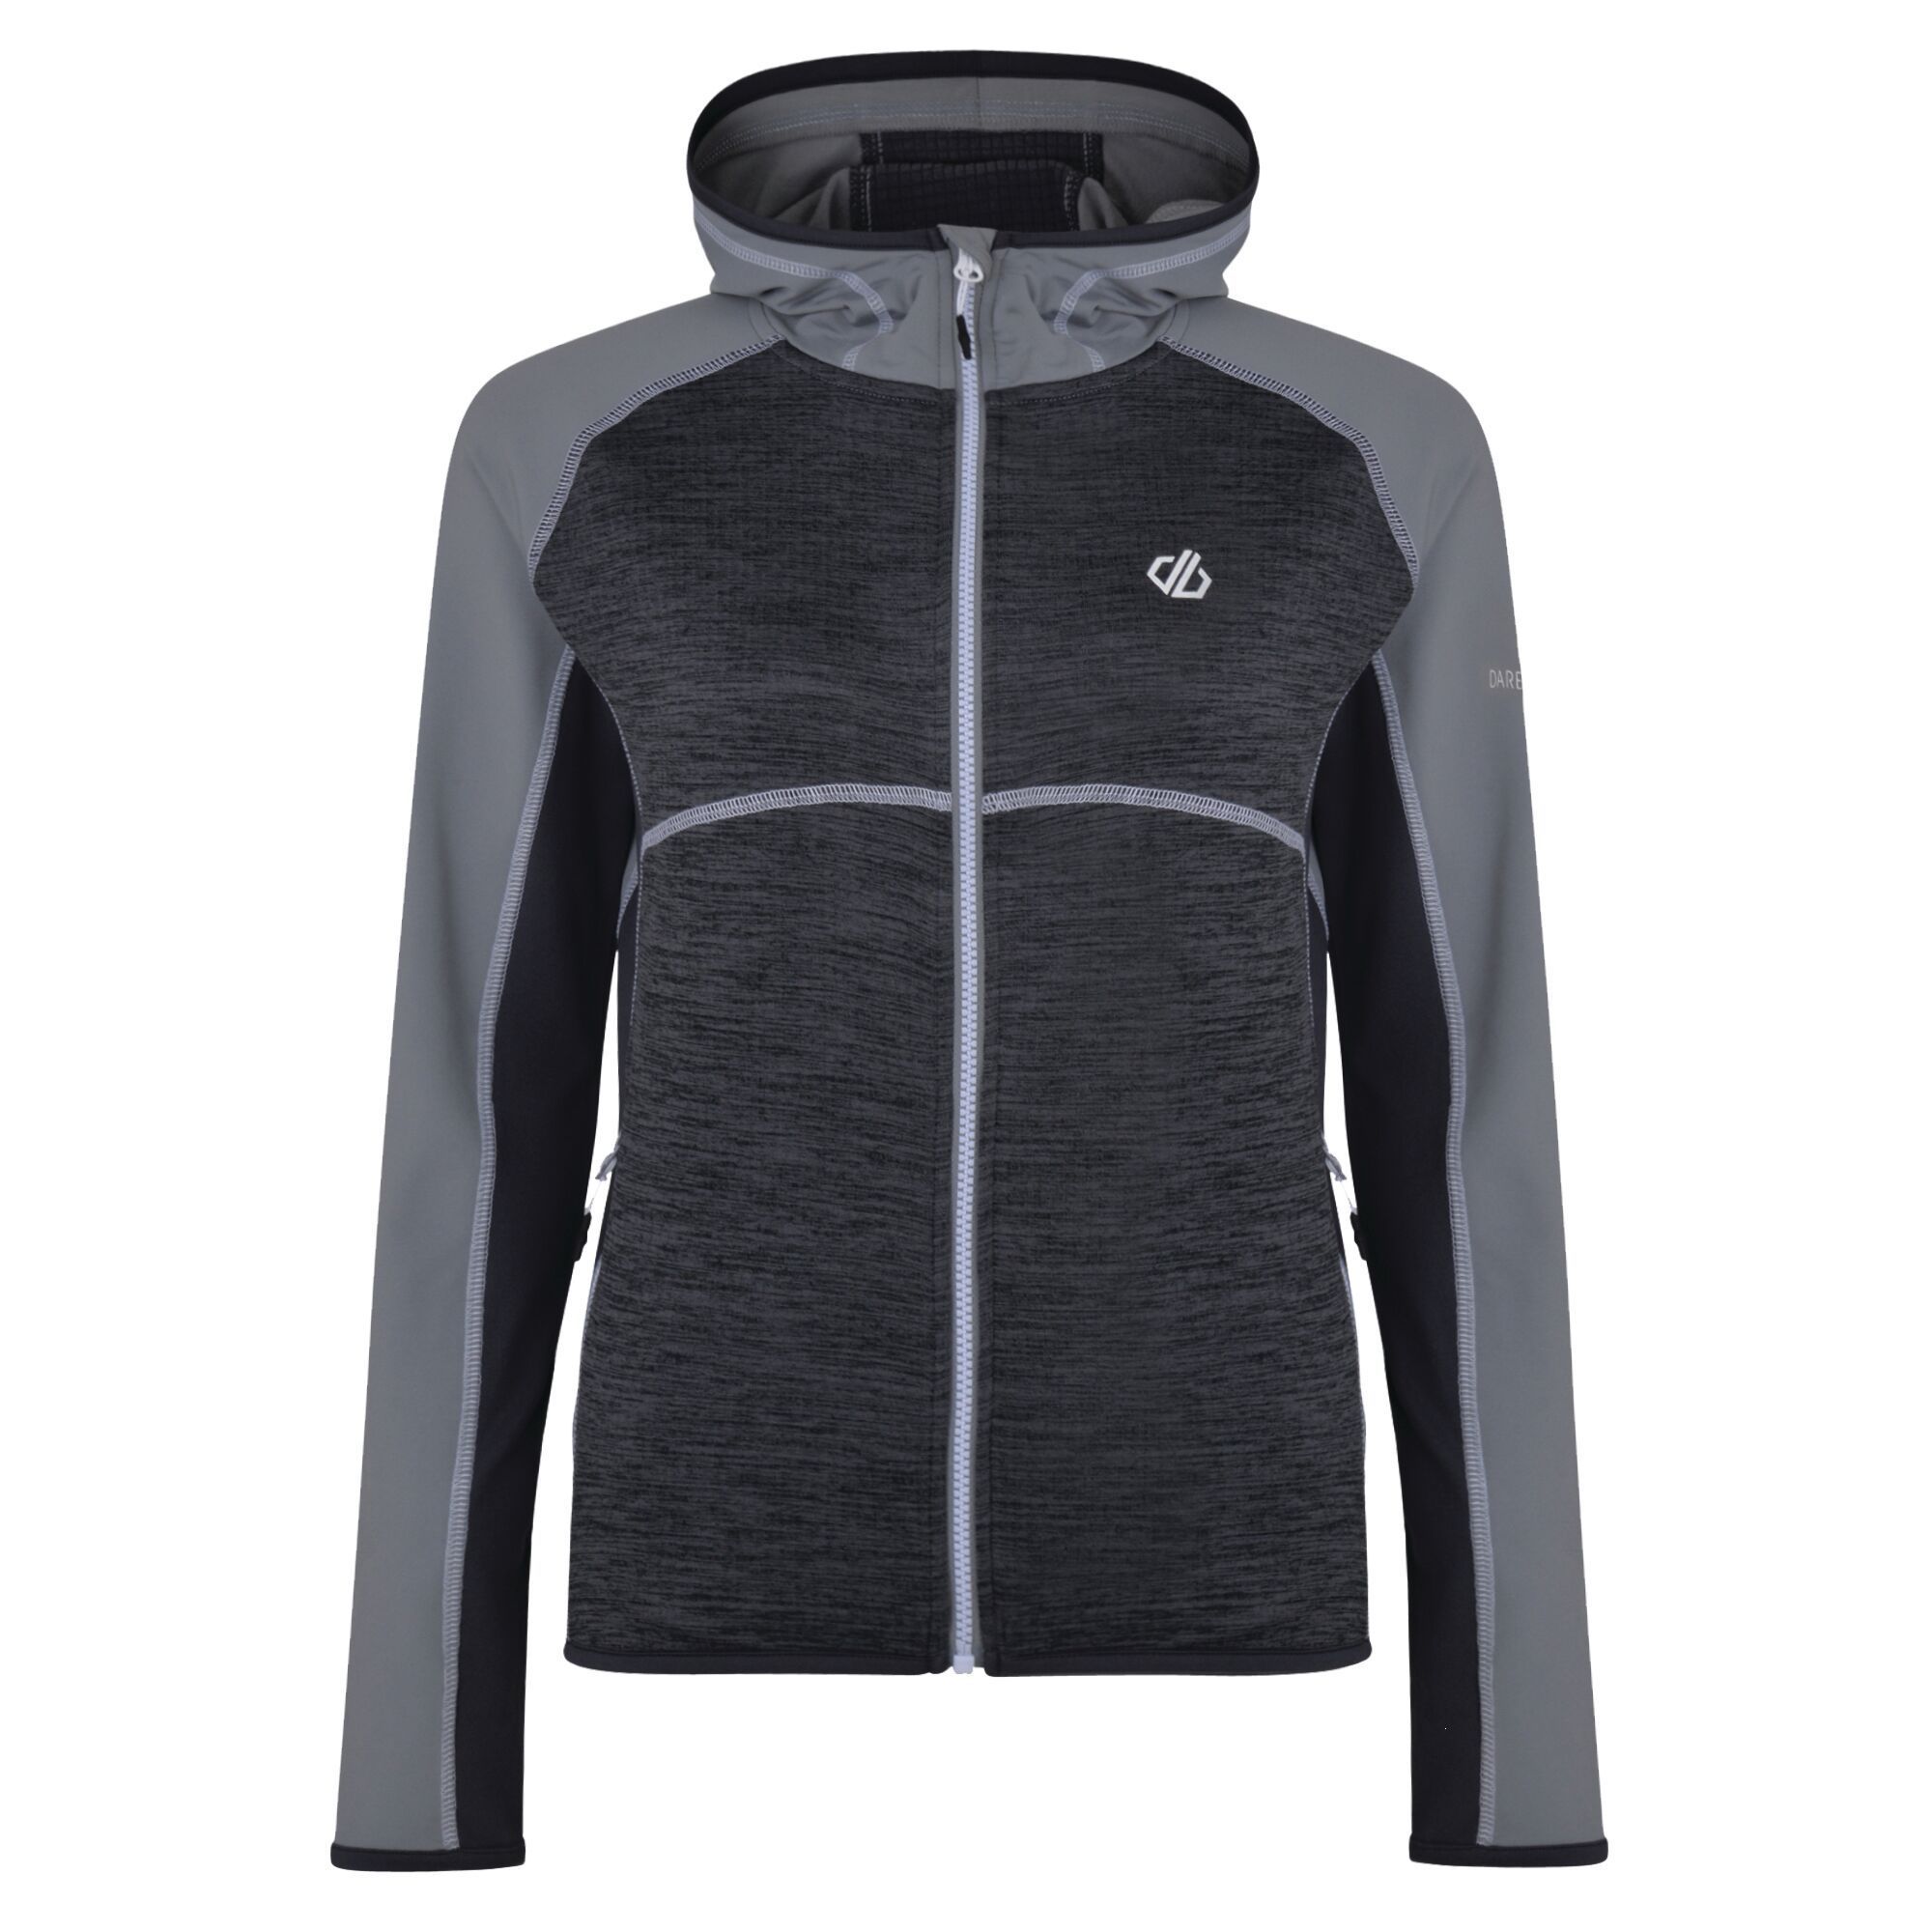 Elastane 12%, polyester 88%. Lightweight Ilus Core warm backed knitted stretch fabric with marl mix. Quick drying. Grown on hood. Full length zip. Inner zip & chin guard. 2 x lower zip pockets. Stretch binding to cuffs and hem.